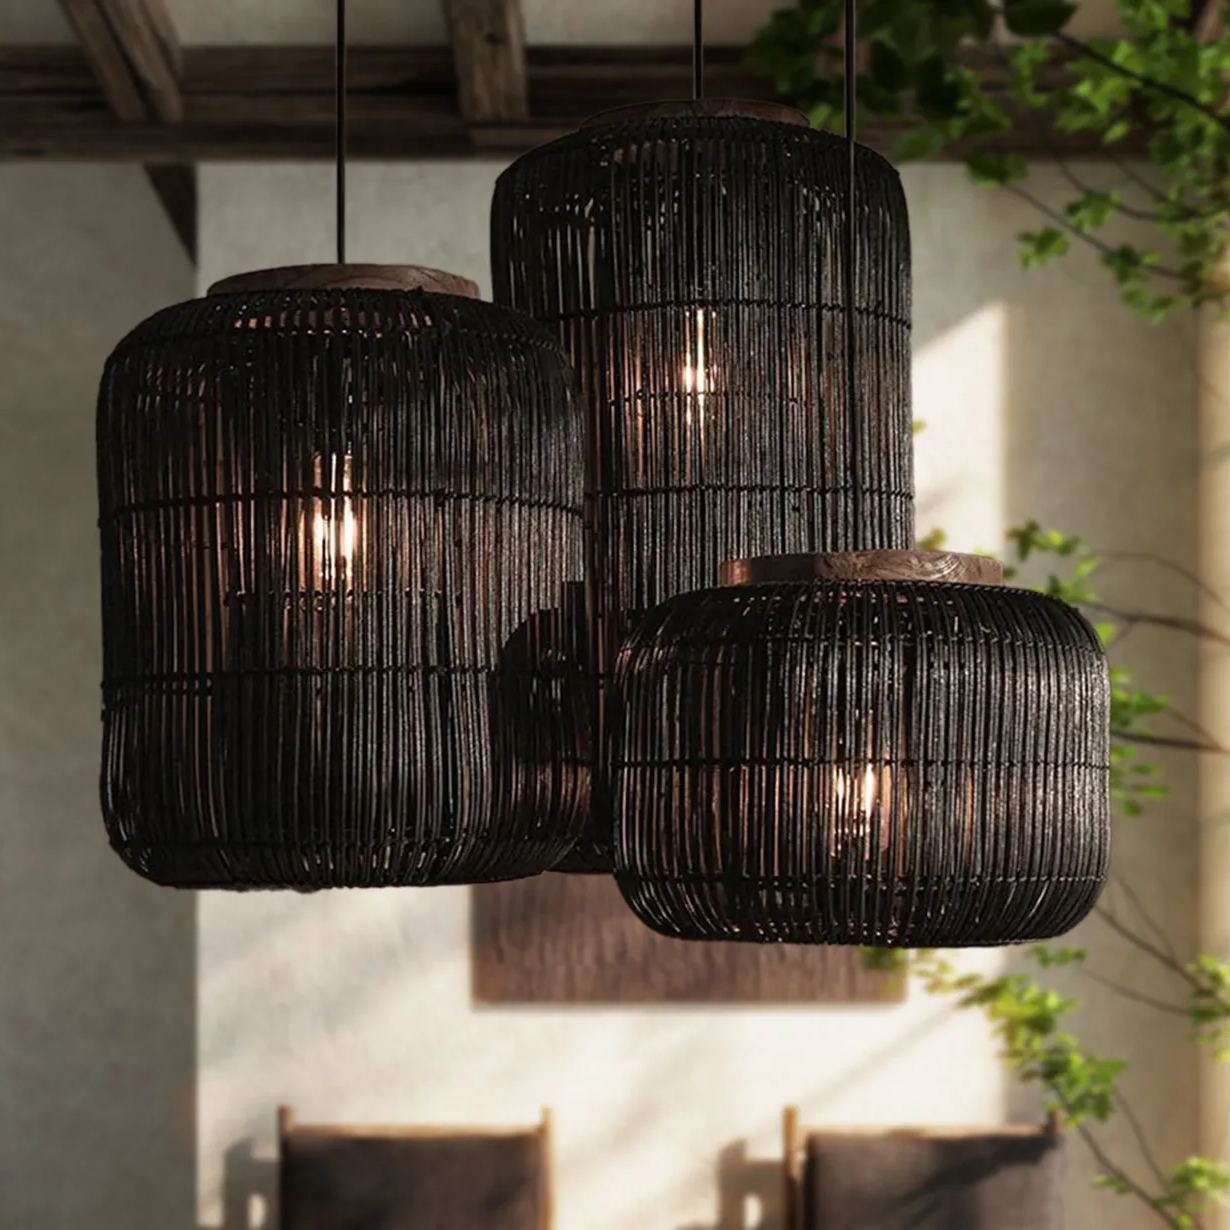 New Hand Knitted Rattan Pendant Lights